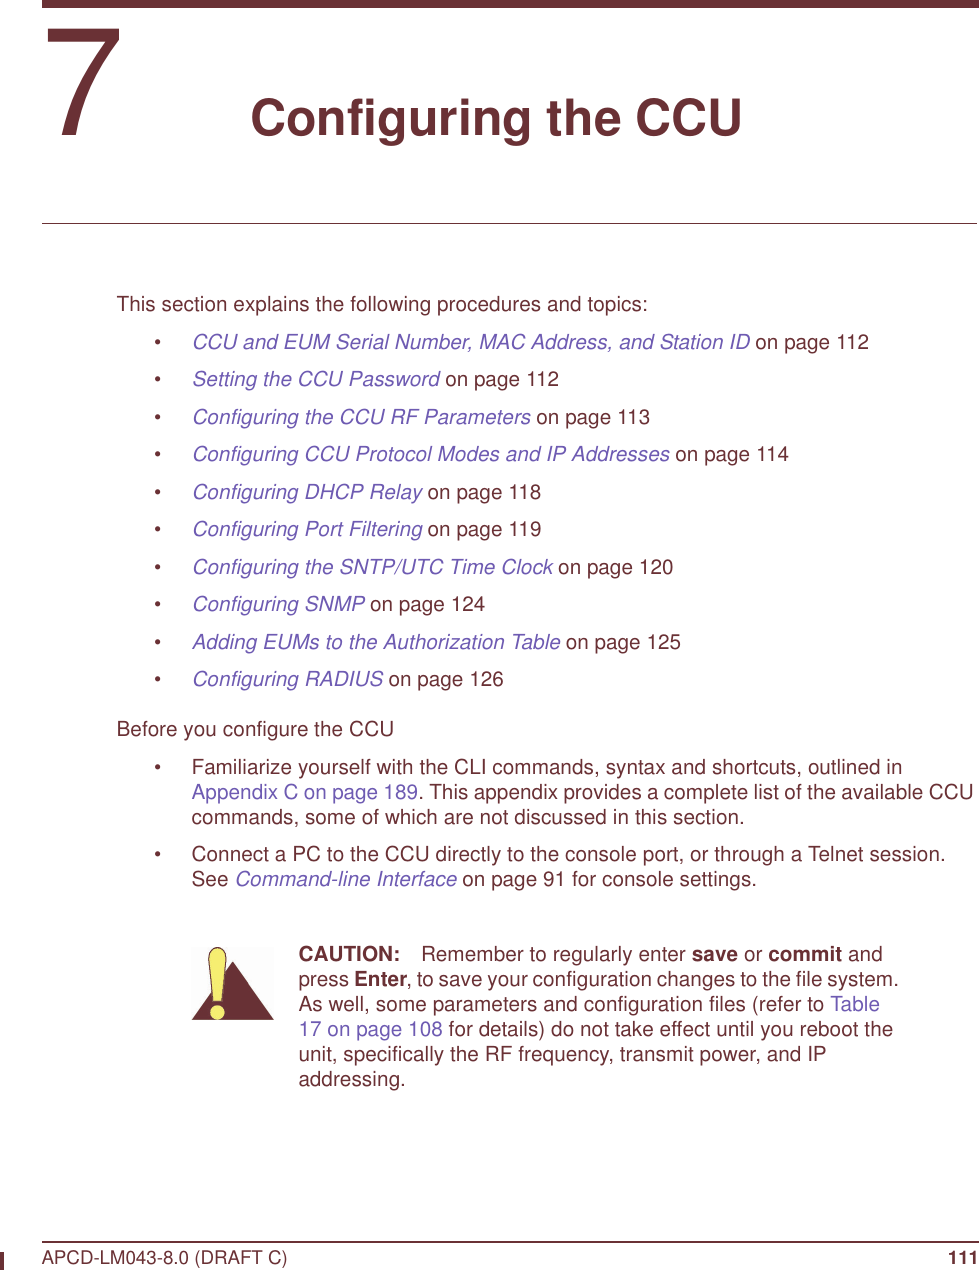 APCD-LM043-8.0 (DRAFT C) 1117   Configuring the CCUThis section explains the following procedures and topics:•CCU and EUM Serial Number, MAC Address, and Station ID on page 112•Setting the CCU Password on page 112•Configuring the CCU RF Parameters on page 113•Configuring CCU Protocol Modes and IP Addresses on page 114•Configuring DHCP Relay on page 118•Configuring Port Filtering on page 119•Configuring the SNTP/UTC Time Clock on page 120•Configuring SNMP on page 124•Adding EUMs to the Authorization Table on page 125•Configuring RADIUS on page 126Before you configure the CCU• Familiarize yourself with the CLI commands, syntax and shortcuts, outlined in Appendix C on page 189. This appendix provides a complete list of the available CCU commands, some of which are not discussed in this section.• Connect a PC to the CCU directly to the console port, or through a Telnet session. See Command-line Interface on page 91 for console settings. CAUTION: Remember to regularly enter save or commit and press Enter, to save your configuration changes to the file system. As well, some parameters and configuration files (refer to Table 17 on page 108 for details) do not take effect until you reboot the unit, specifically the RF frequency, transmit power, and IP addressing.